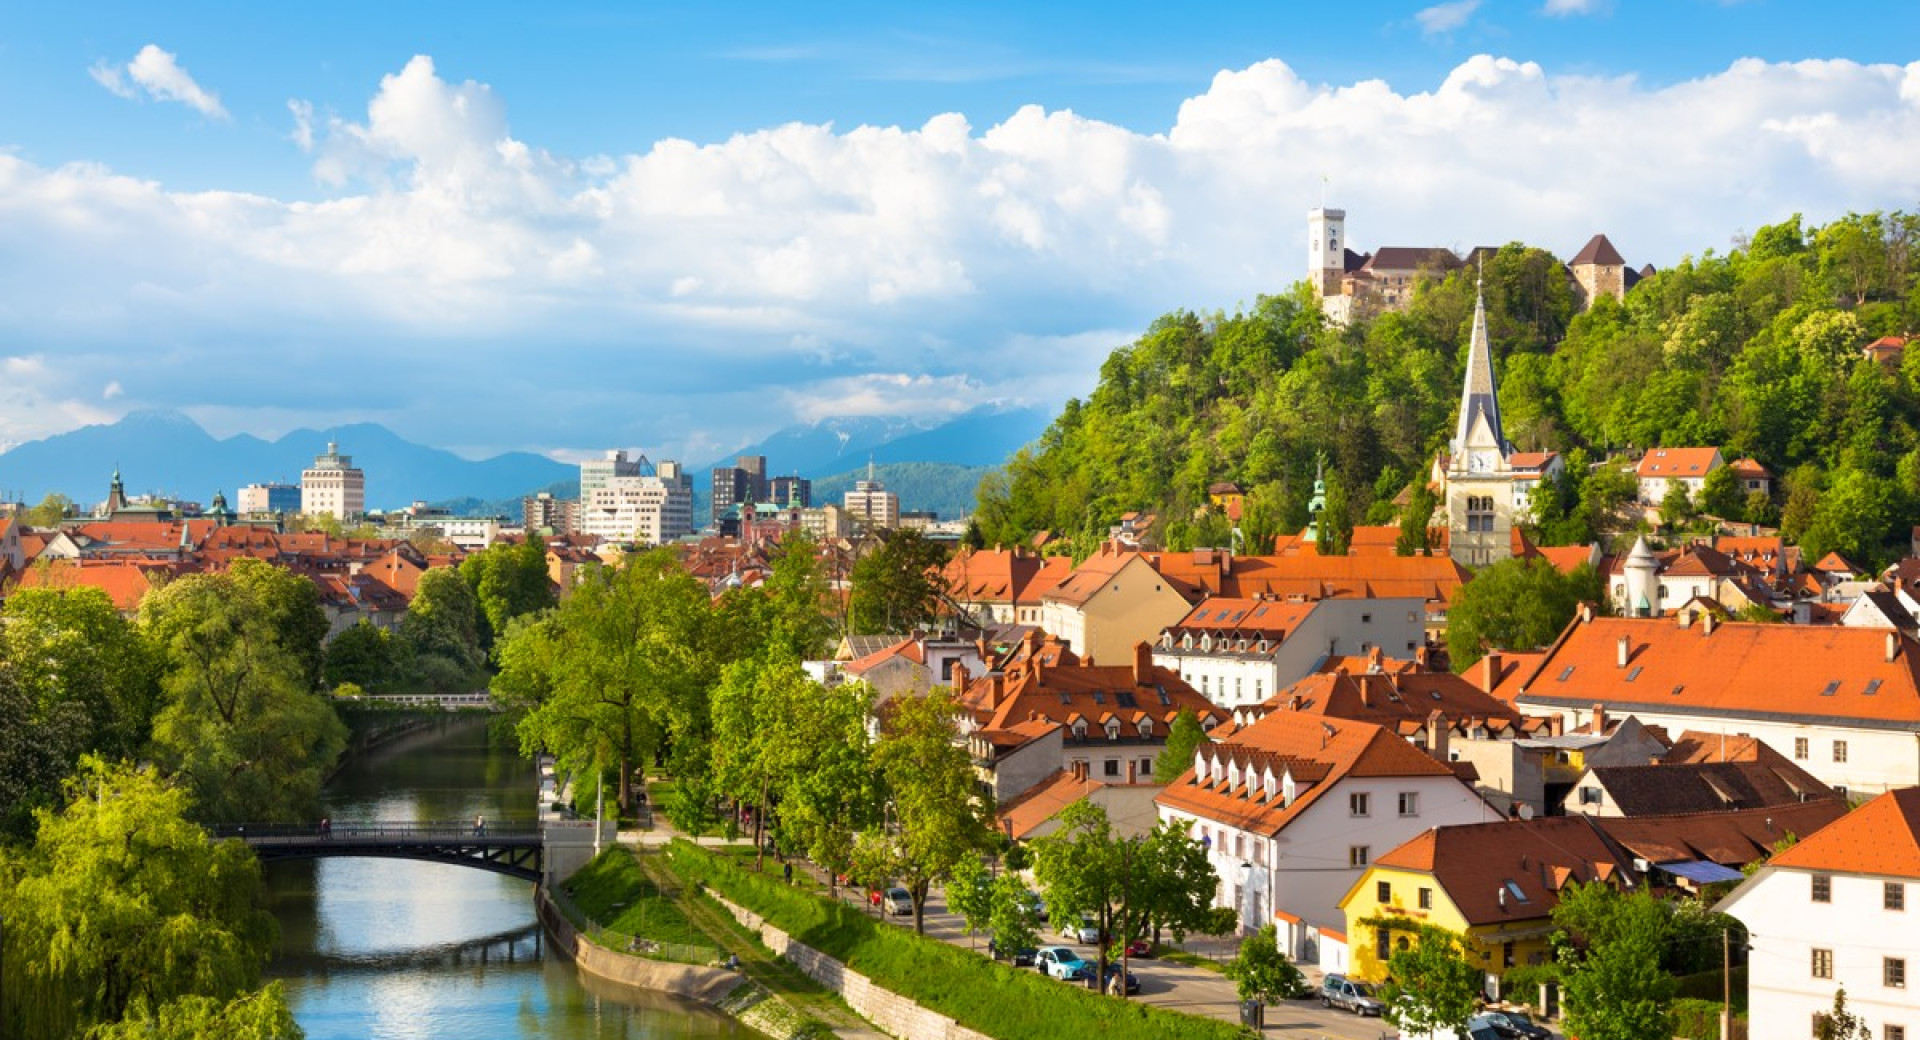 Ljubljana makes the Rough Guides and The Guardians 2016 hotlists of holiday destinations